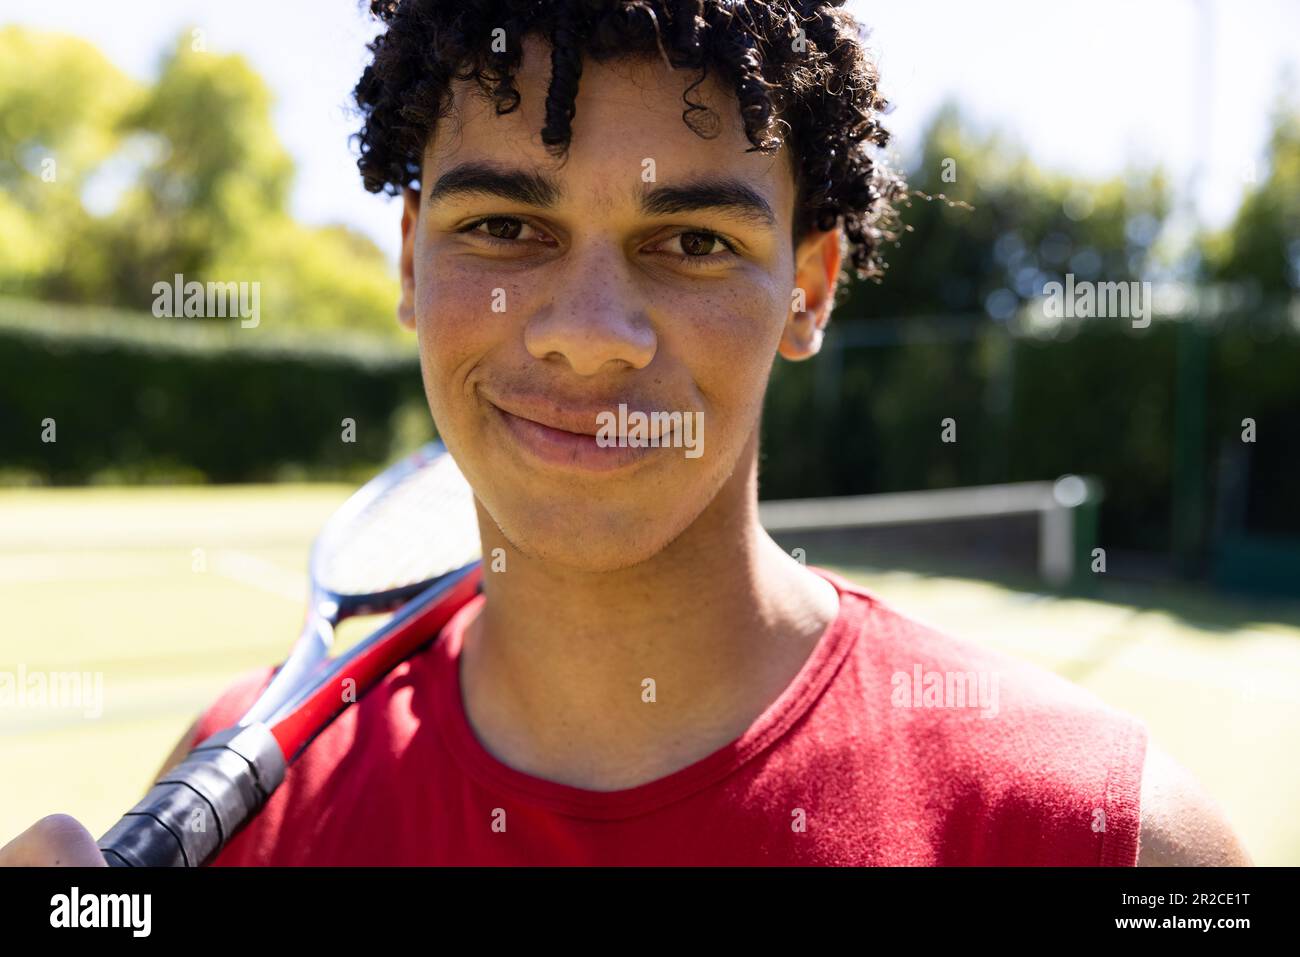 Portrait of smiling fit biracial man with tennis racket on sunny outdoor tennis court Stock Photo